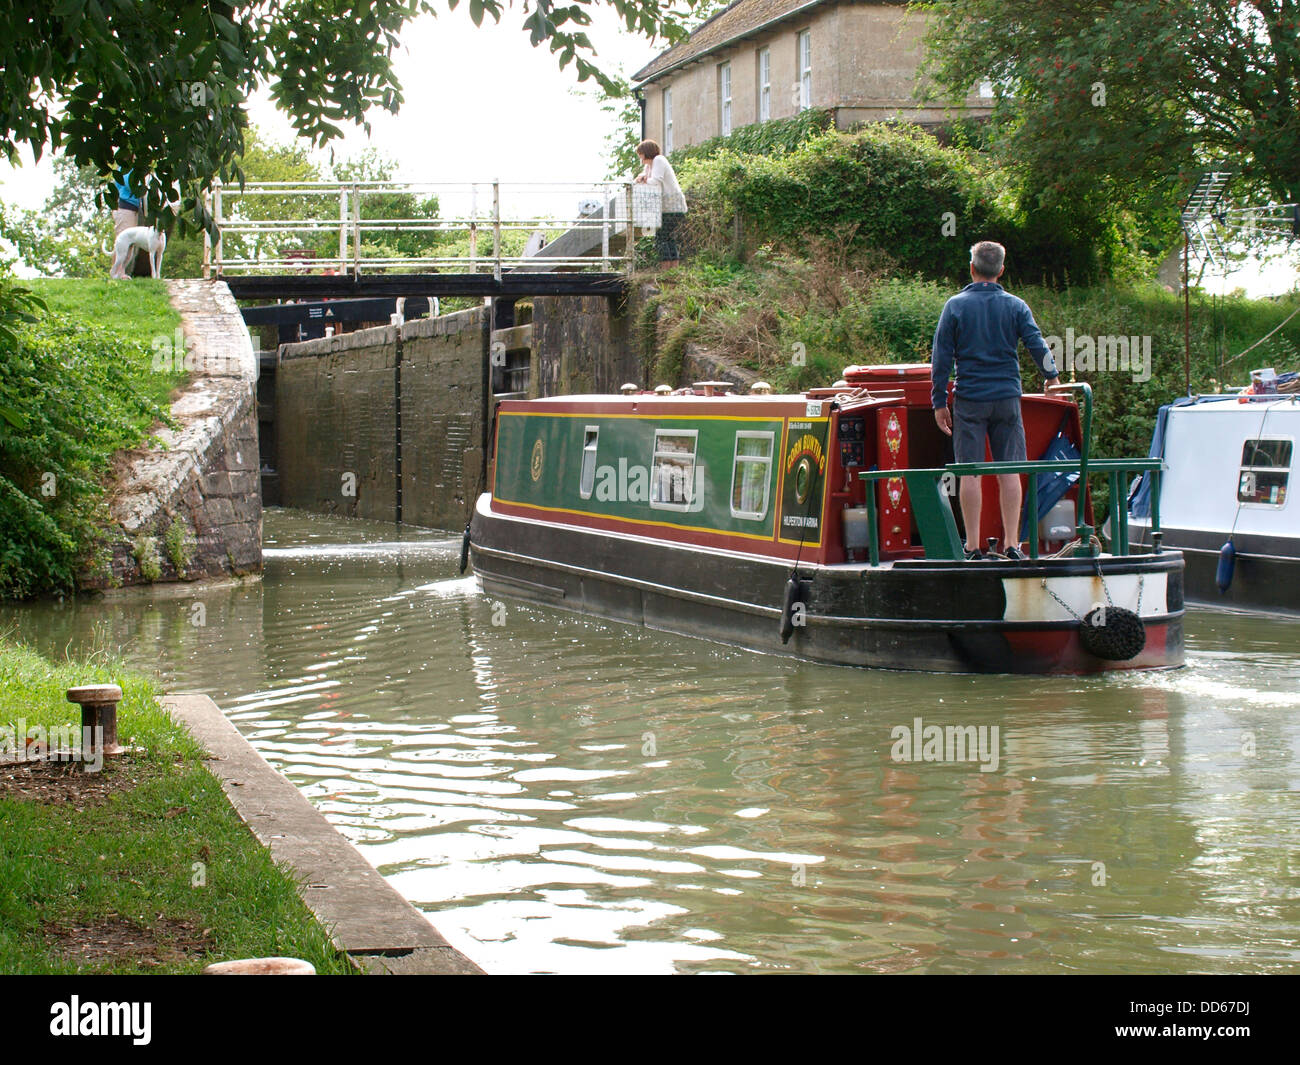 Narrow boat entering a lock on the Wilts and Berks Canal, Semington, Wiltshire, UK 2013 Stock Photo